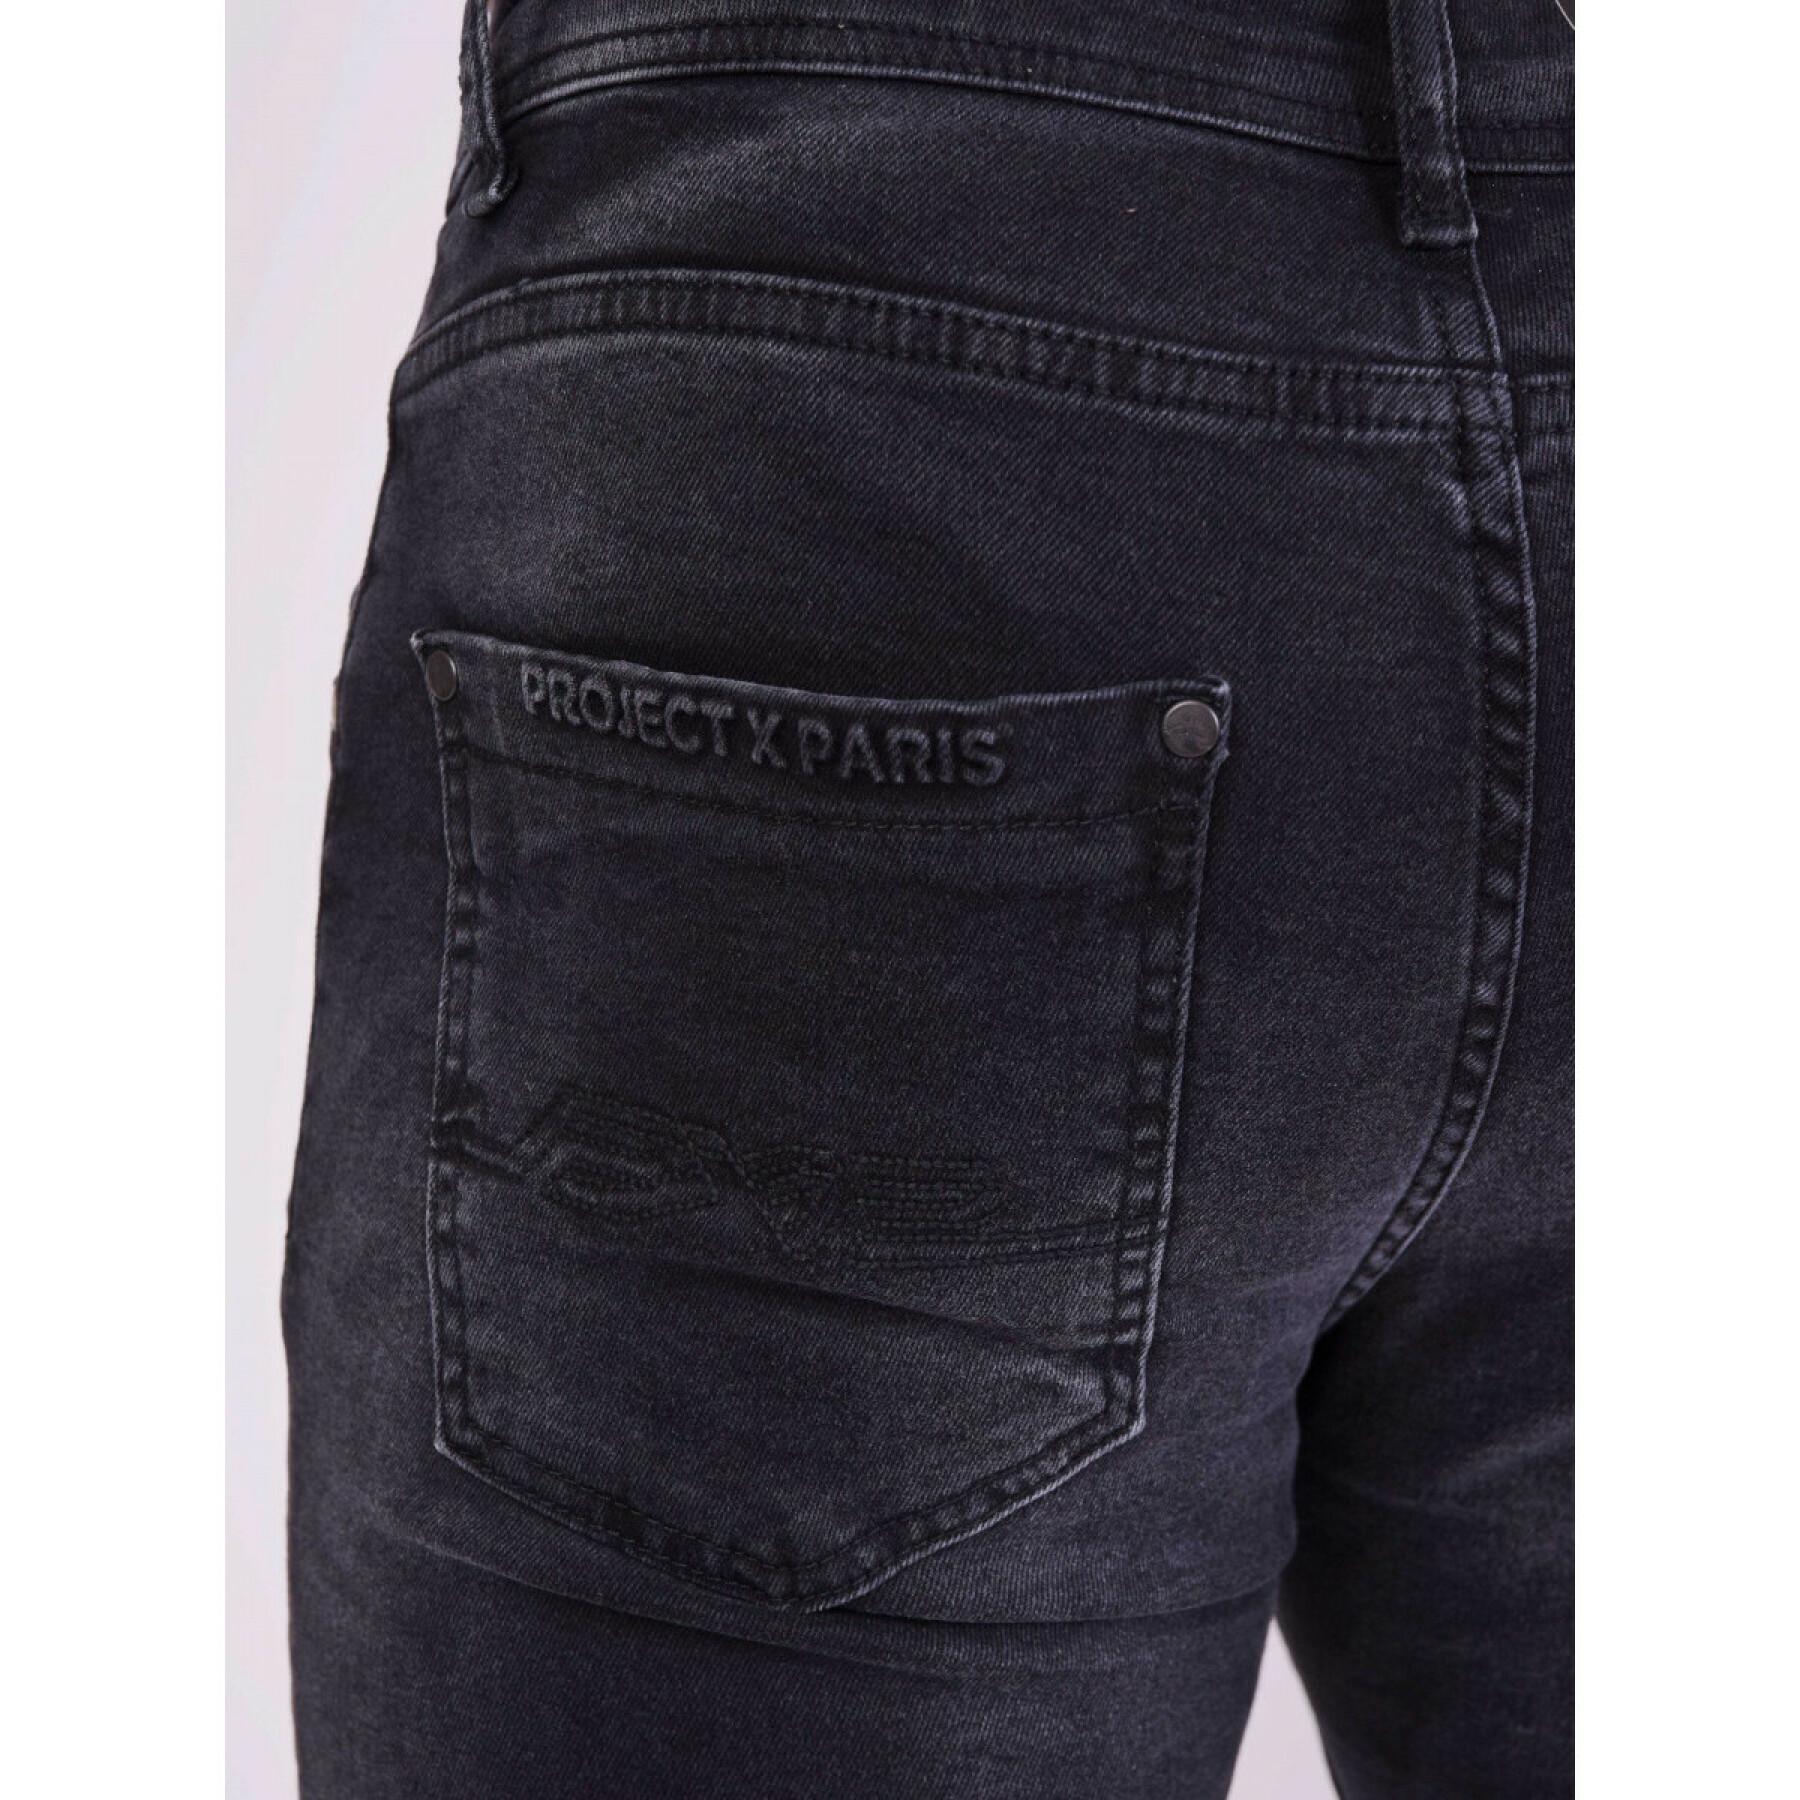 Skinny jeans with logo detail on the back Project X Paris